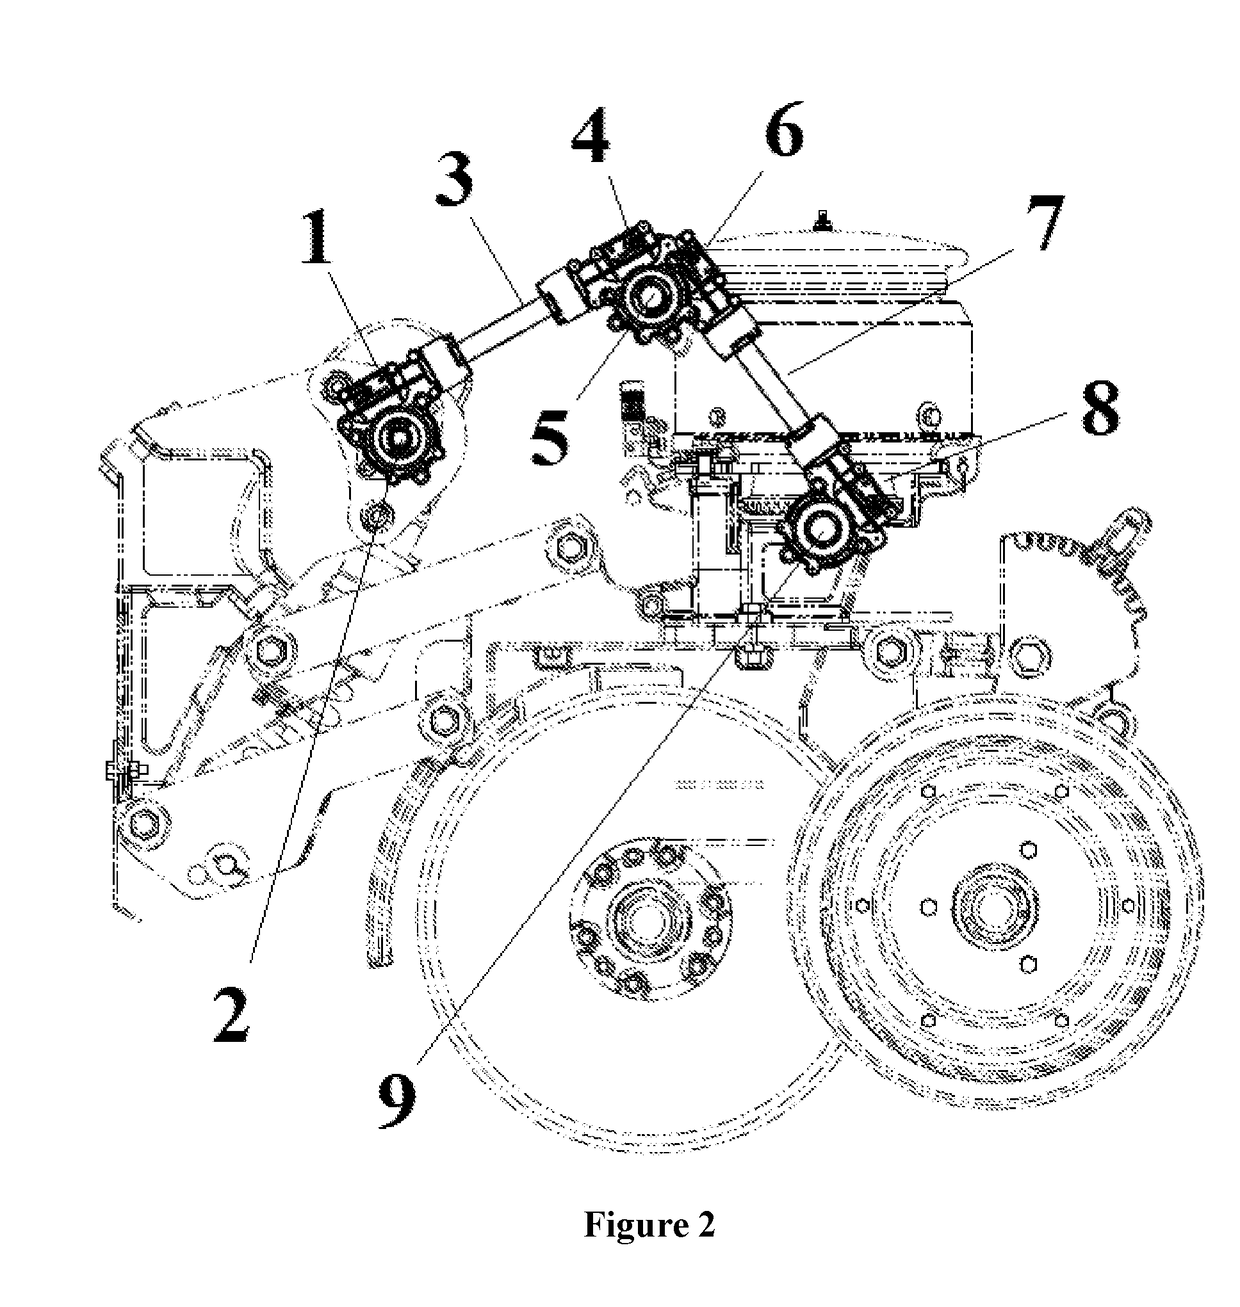 Flexible transmission system for use in agricultural machines and tools in general